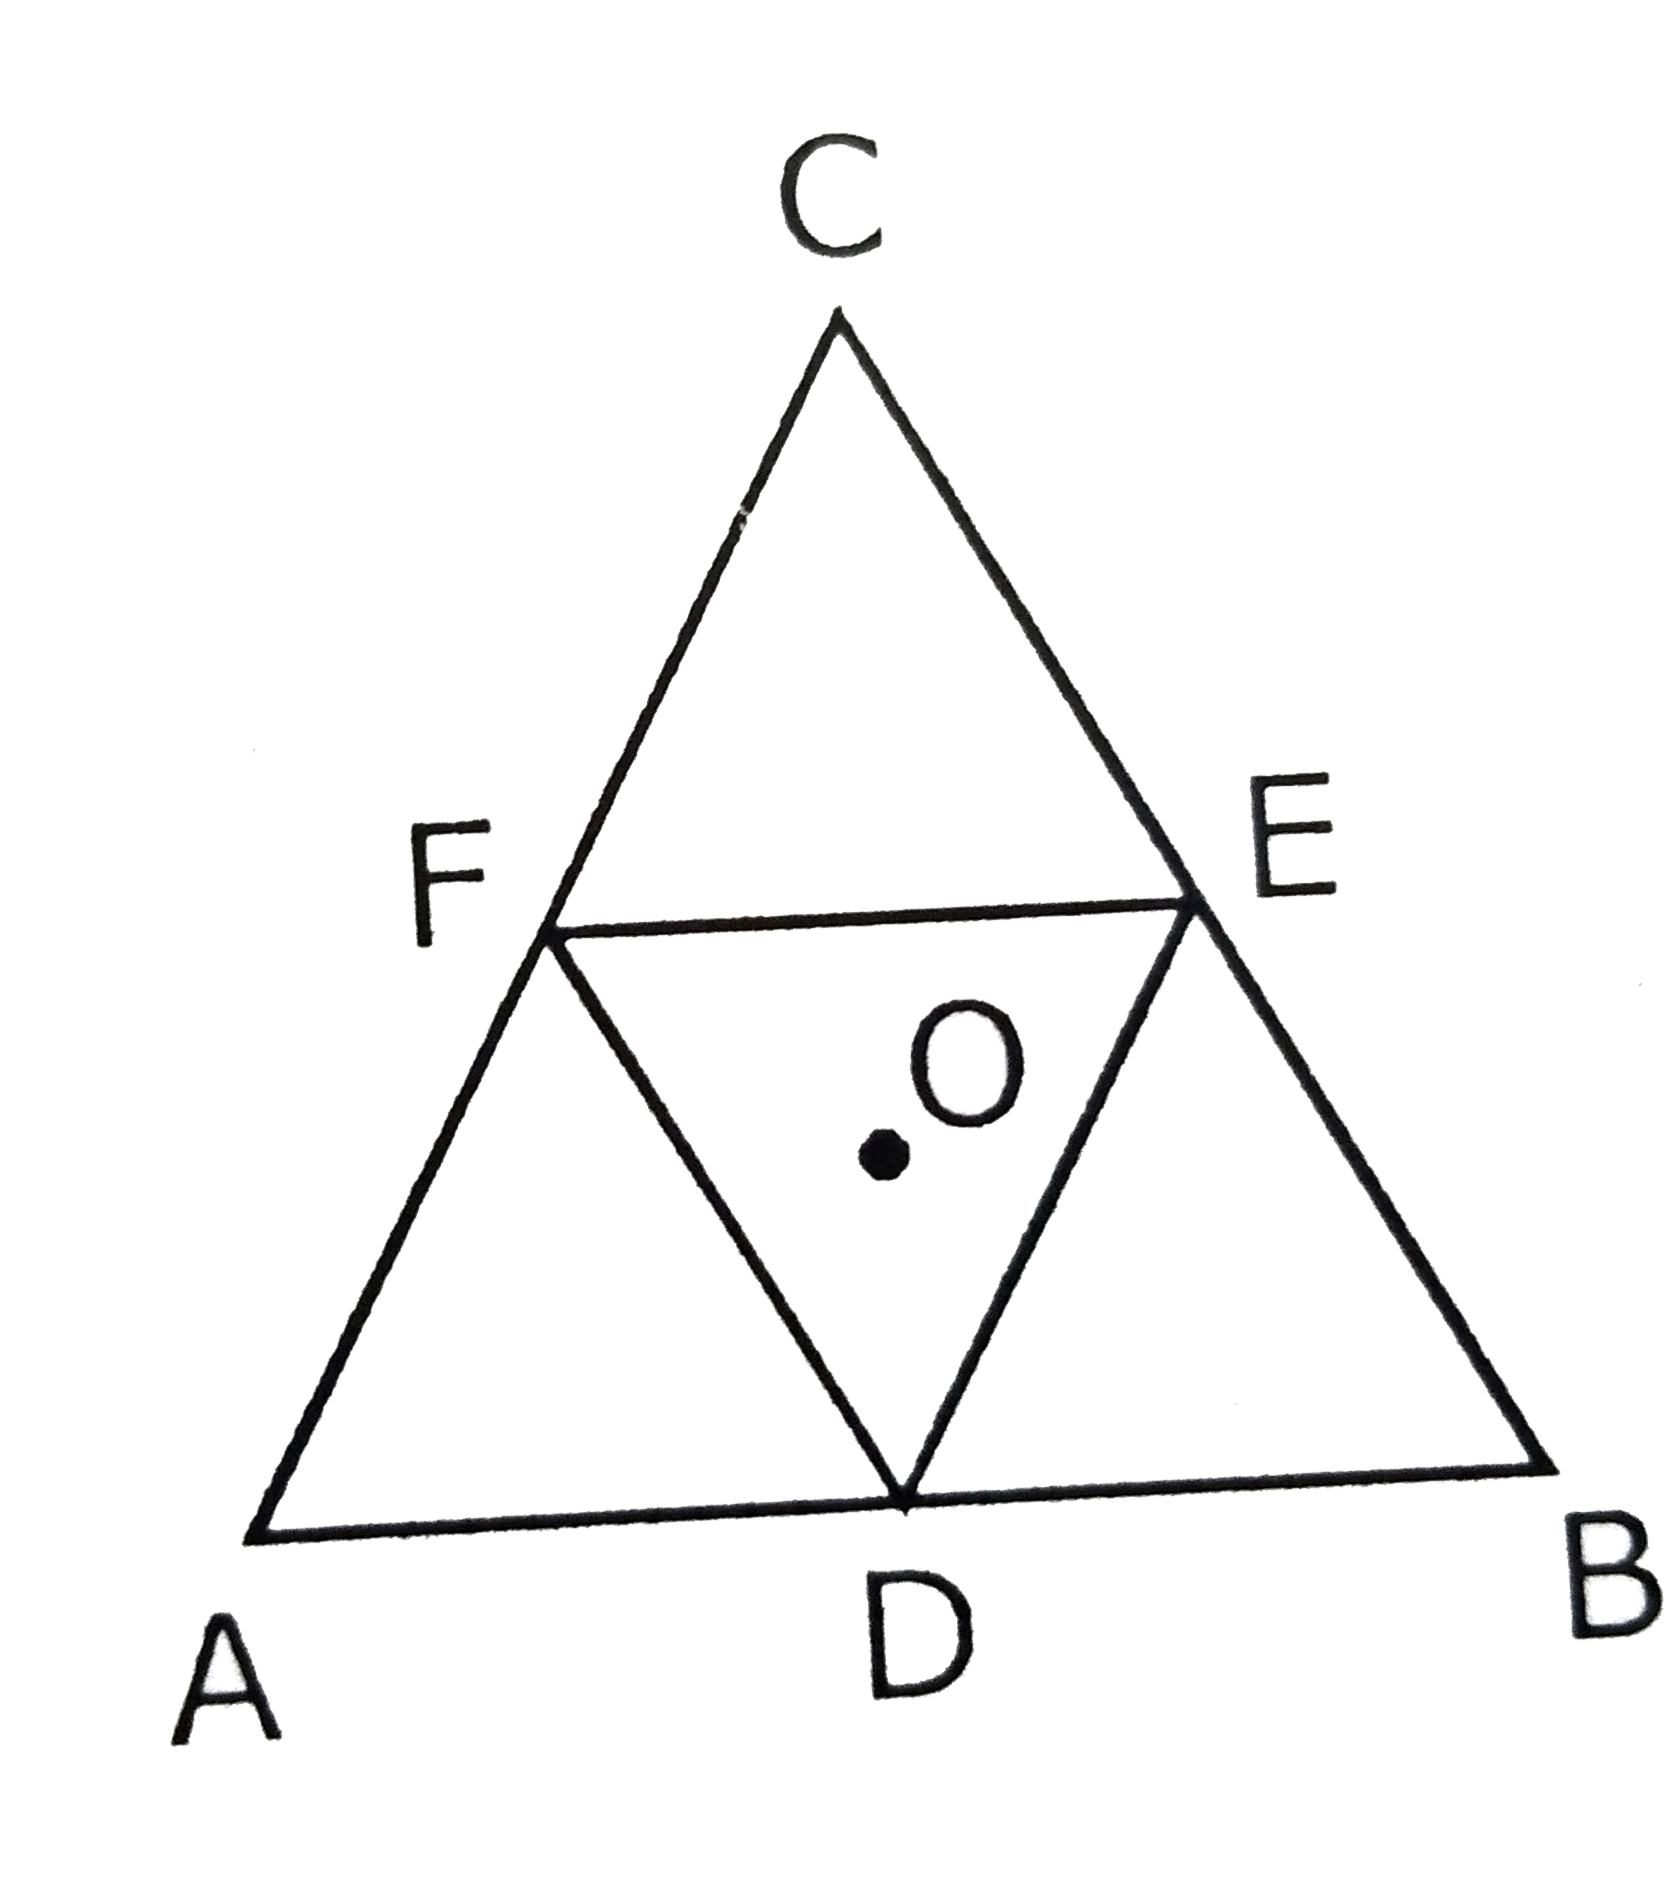 Moment of inertia of an equilateral triangular lamina ABC, about the axis passing through its centre O and perpendicular to its plane is I(0)  as shown in the figure. A cavithy DEF is cut out from the lamina, where D,E,F are the mid points of the sides. Moment of inertia of the remaining part of lamina about the same axis is -